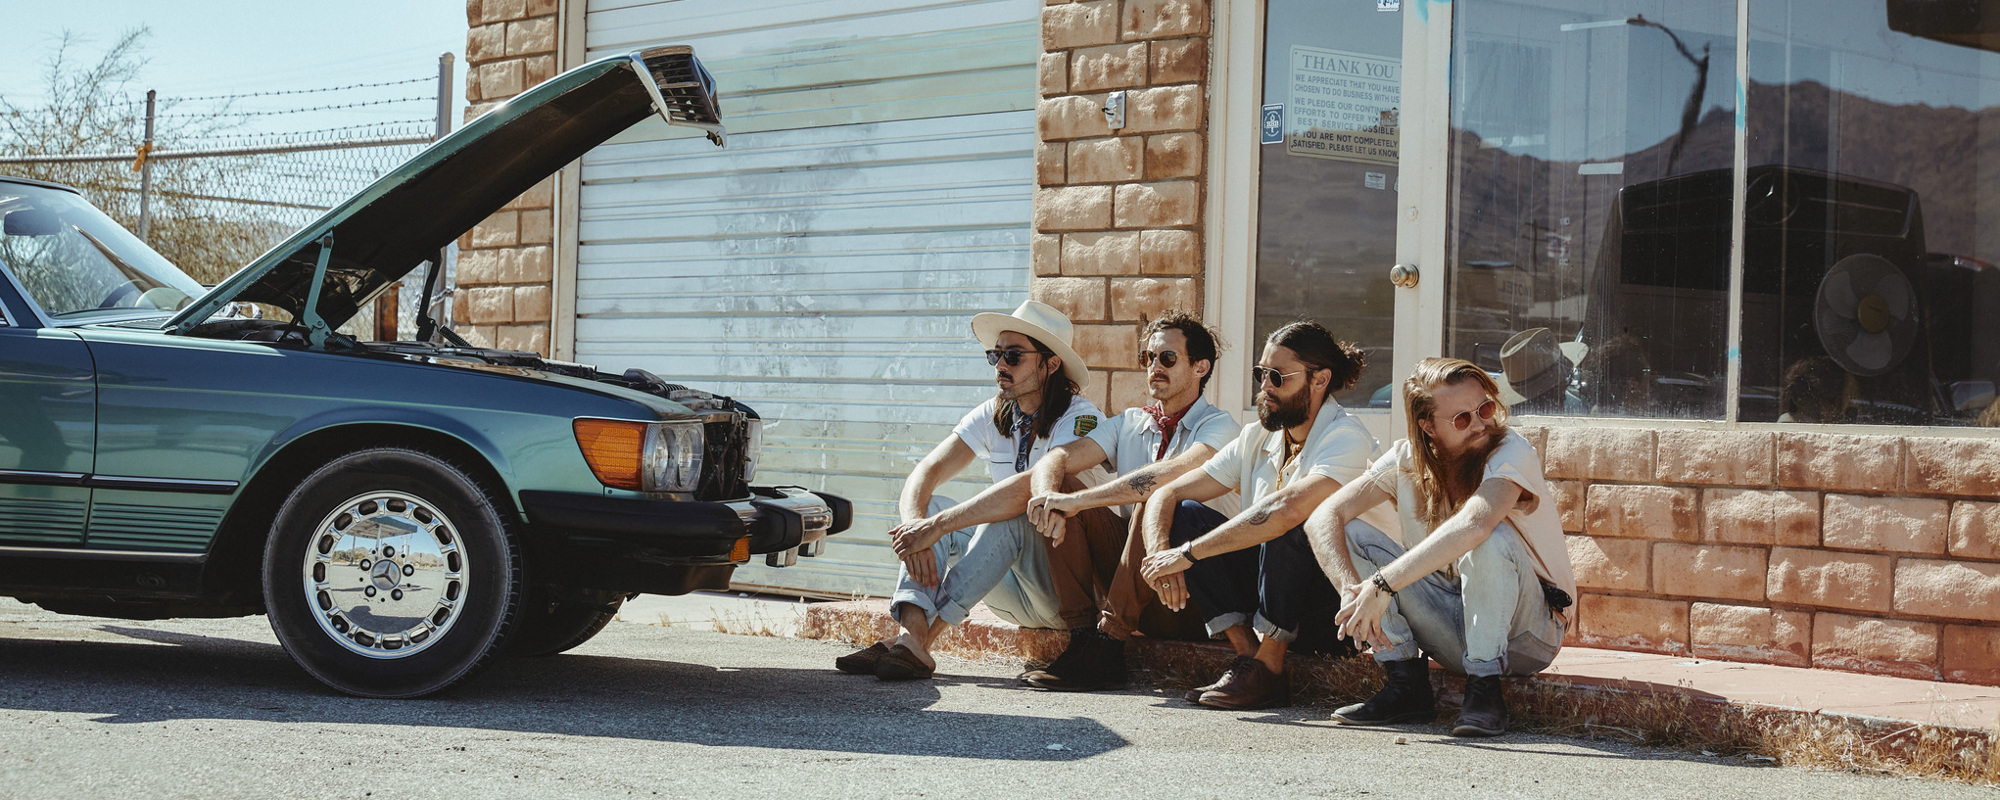 Grizfolk Details What Went Into Writing Each Track On New, Self-titled Album